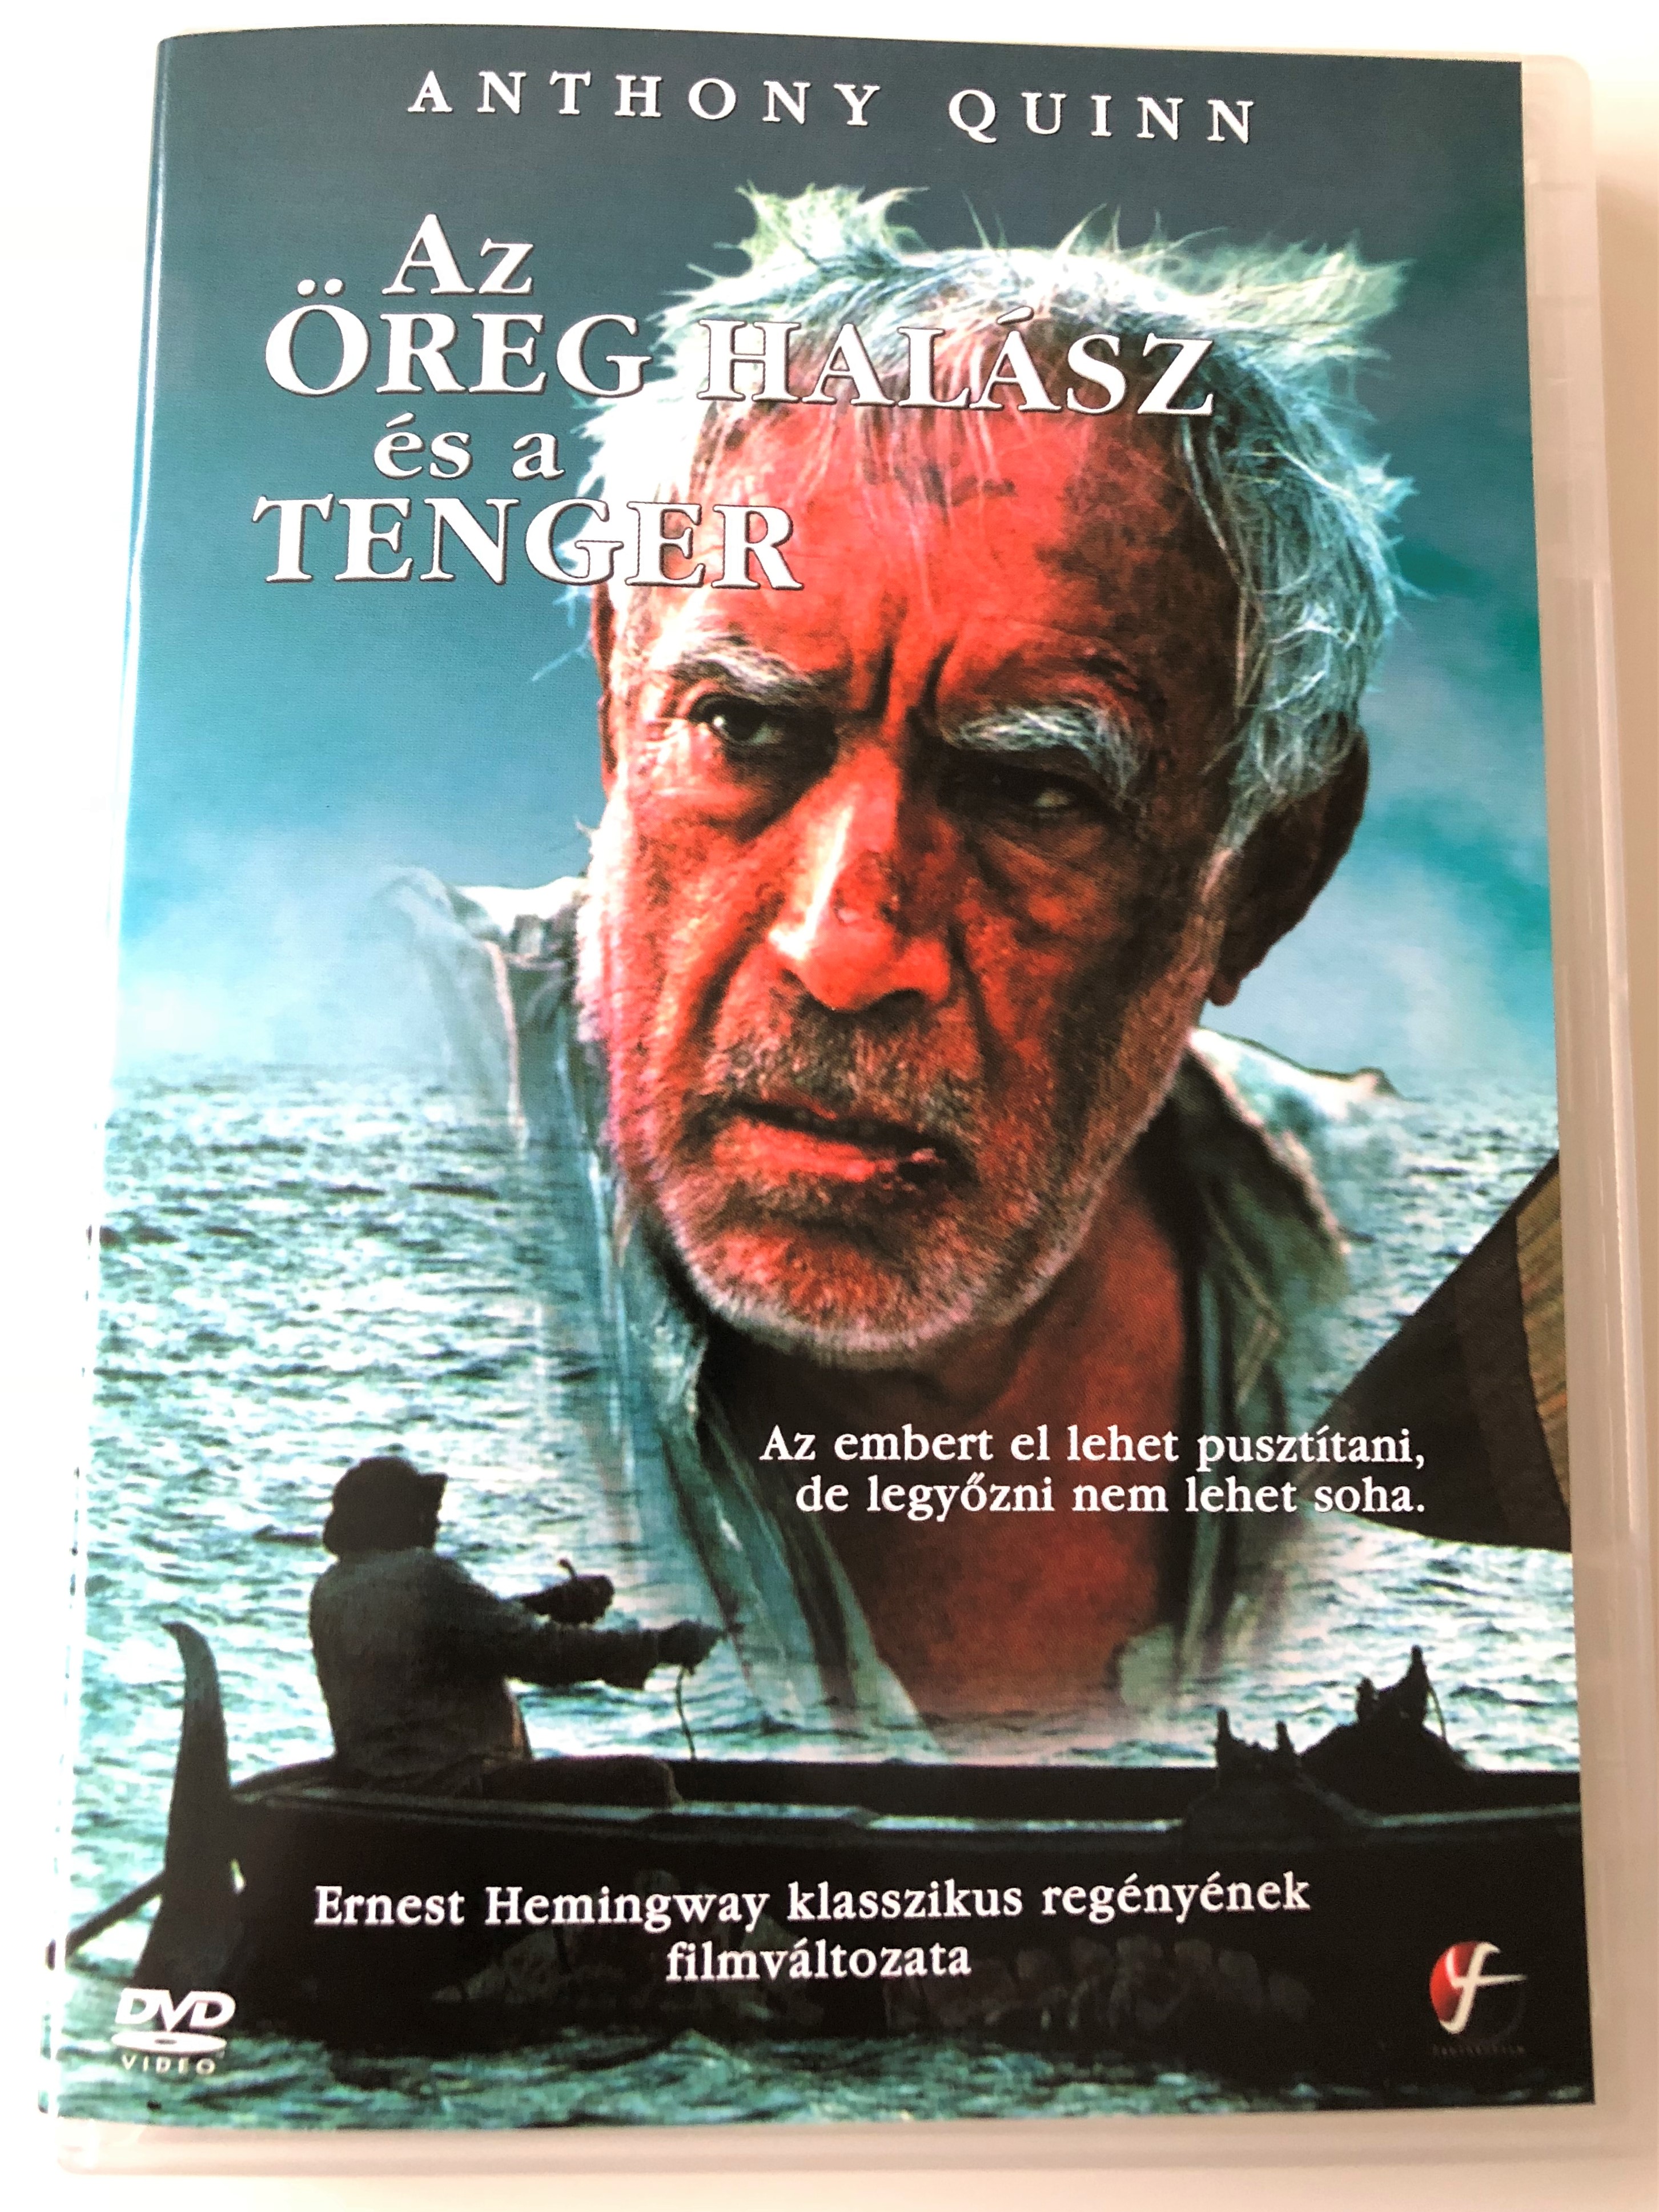 the-old-man-and-the-sea-dvd-1990-az-reg-hal-sz-s-a-tenger-directed-by-jud-taylor-starring-anthony-quinn-gary-cole-patricia-clarkson-alexis-cruz-1-.jpg